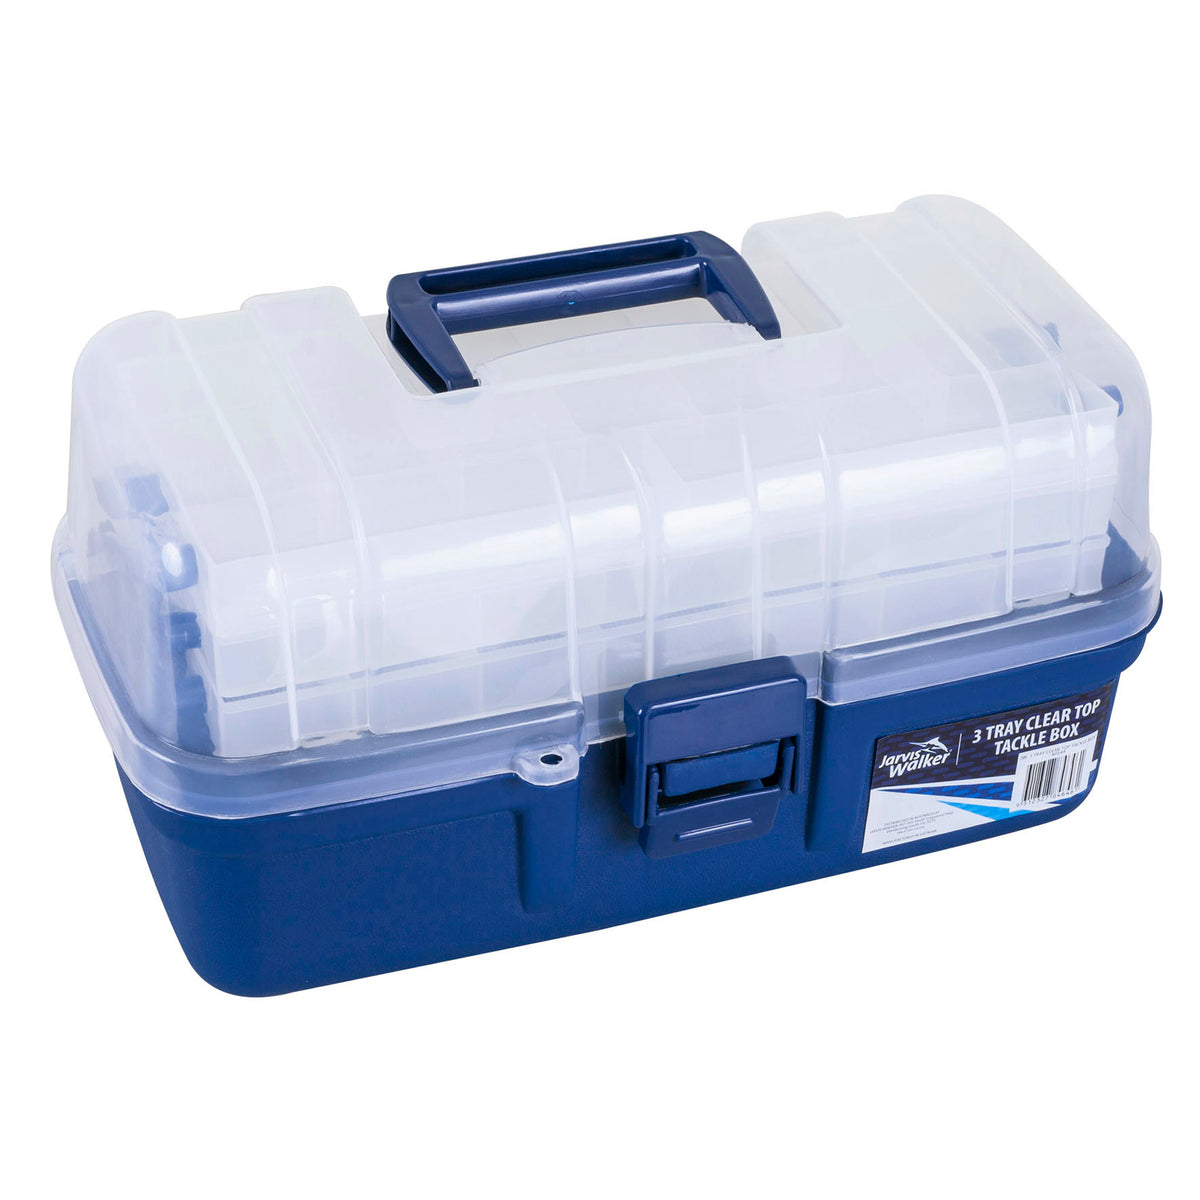 JW 3 Tray Clr-Top Tackle Box 38.5cm (W) x 20.5cm (H) x 21cm (D). — Spot On Fishing  Tackle